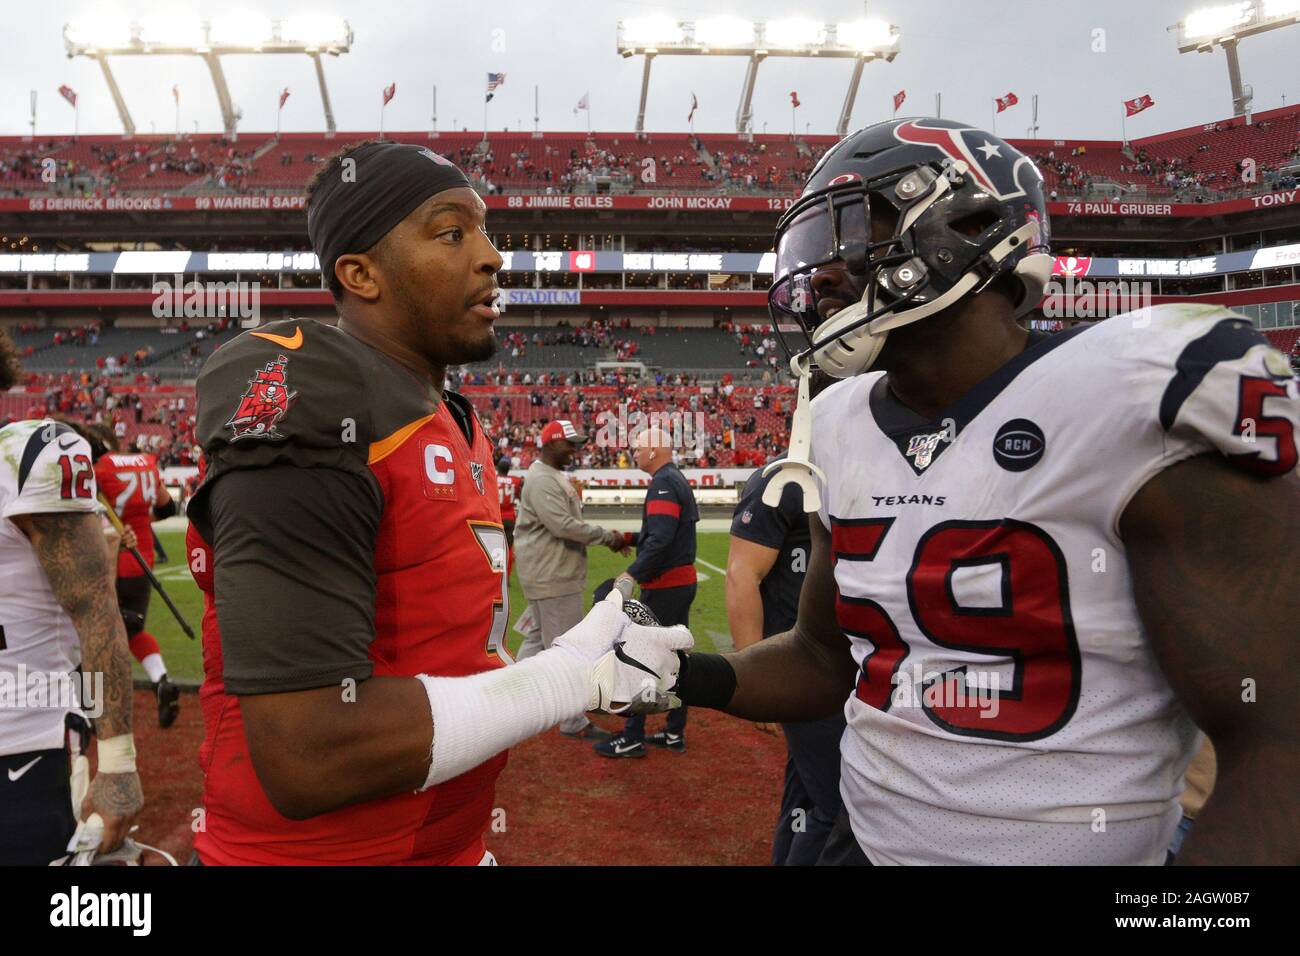 Tampa, Florida, USA. 21st Dec, 2019. Tampa Bay Buccaneers quarterback Jameis Winston (3) and Houston Texans linebacker Whitney Mercilus (59) on the field after the NFL game between the Houston Texans and the Tampa Bay Buccaneers held at Raymond James Stadium in Tampa, Florida. Andrew J. Kramer/Cal Sport Media/Alamy Live News Stock Photo